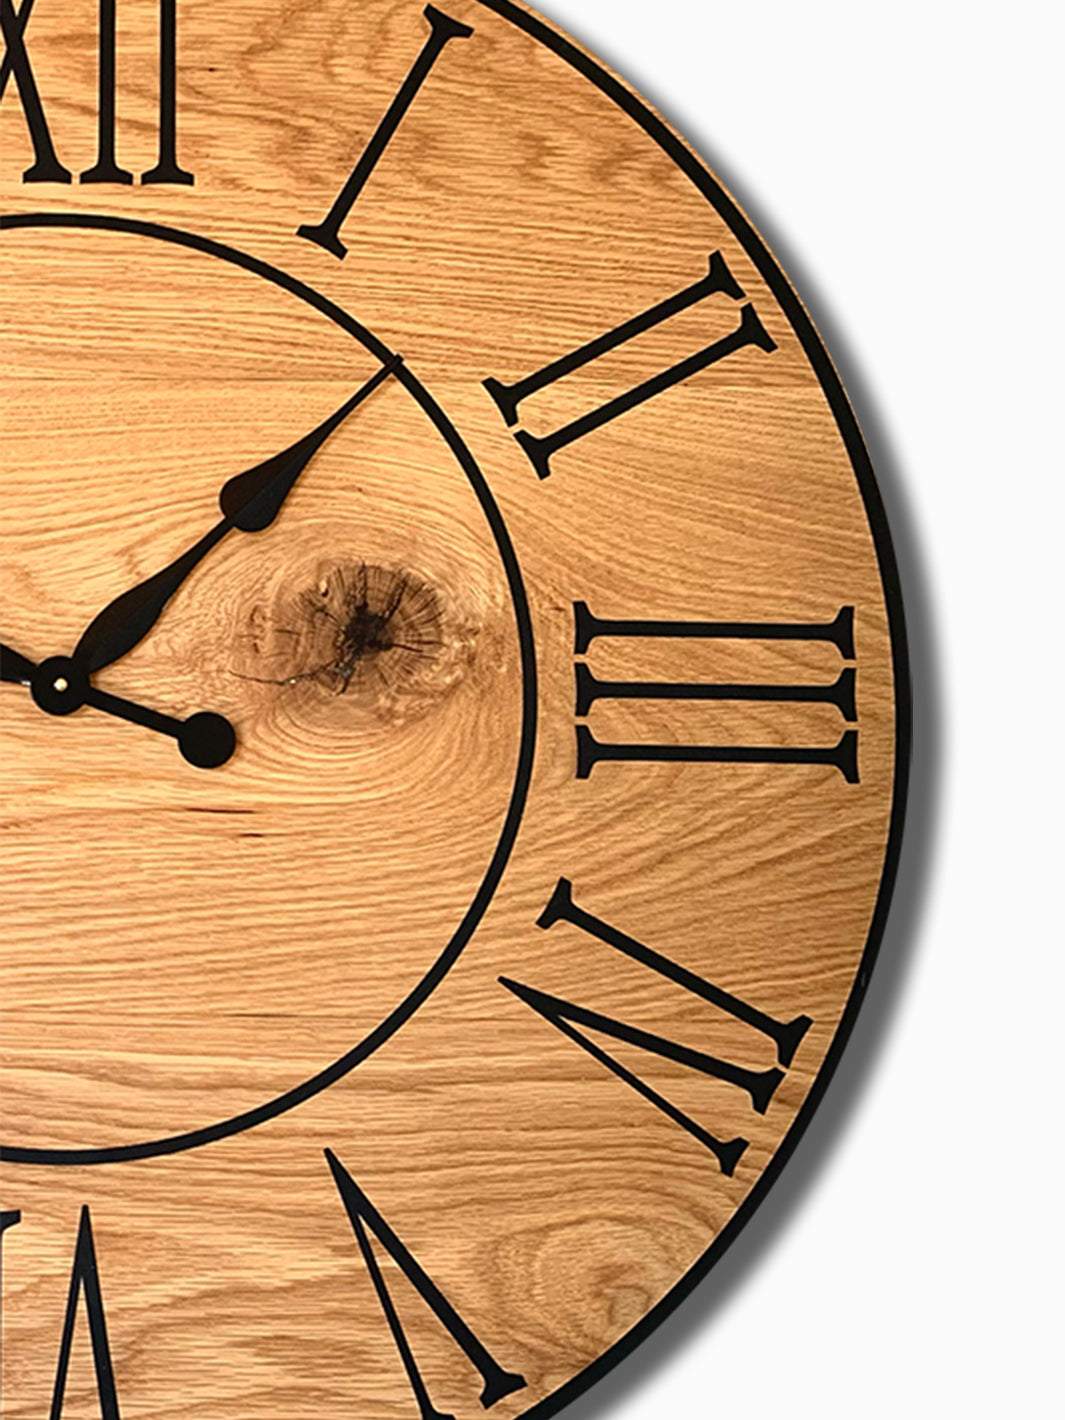 Large Flat Sawn White Oak Wall Clock with Black Roman Numerals Earthly Comfort Clocks -1